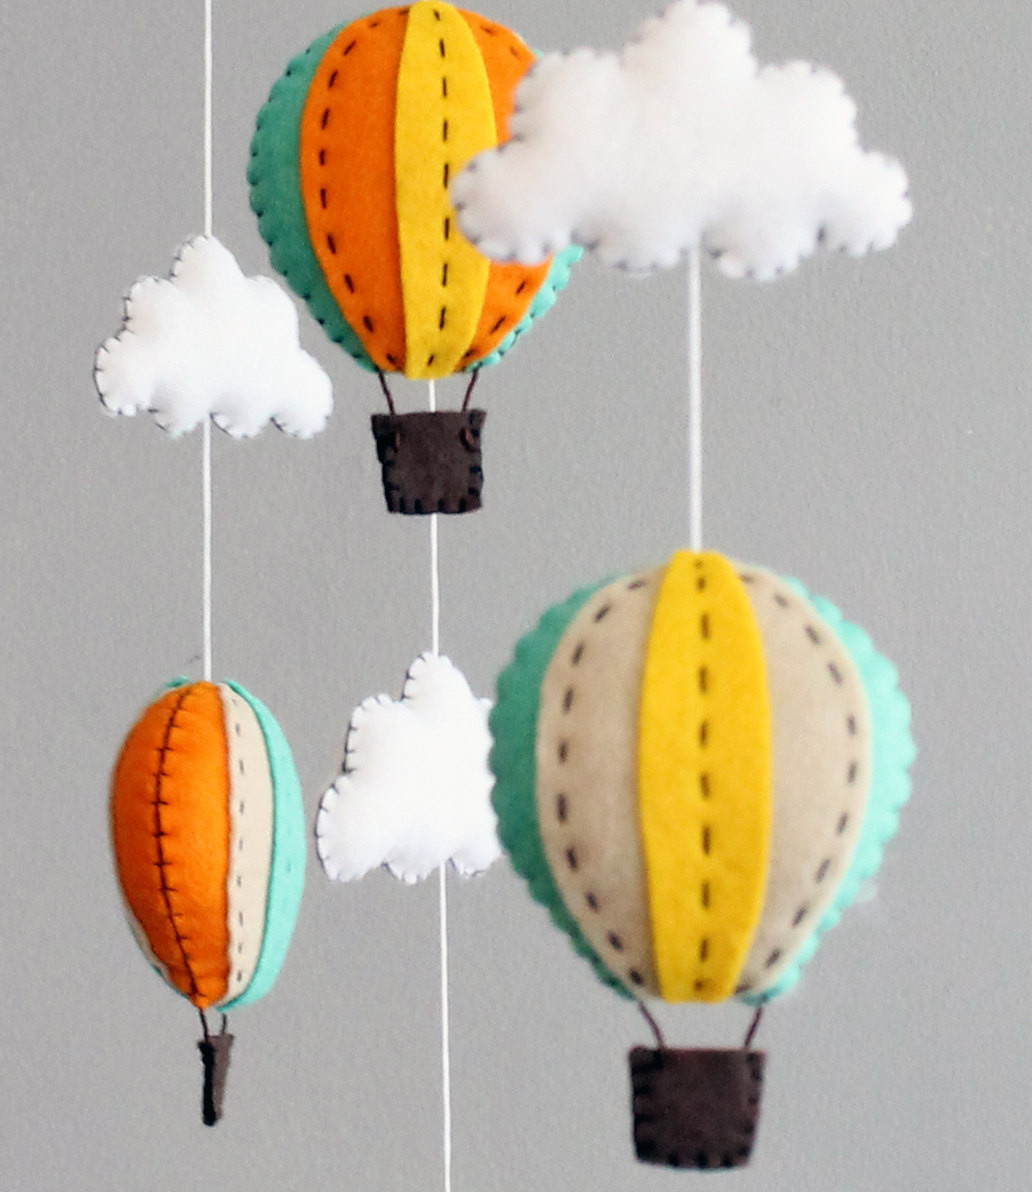 DIY Baby Mobile Kits
 diy baby mobile kit make your own hot air balloon by